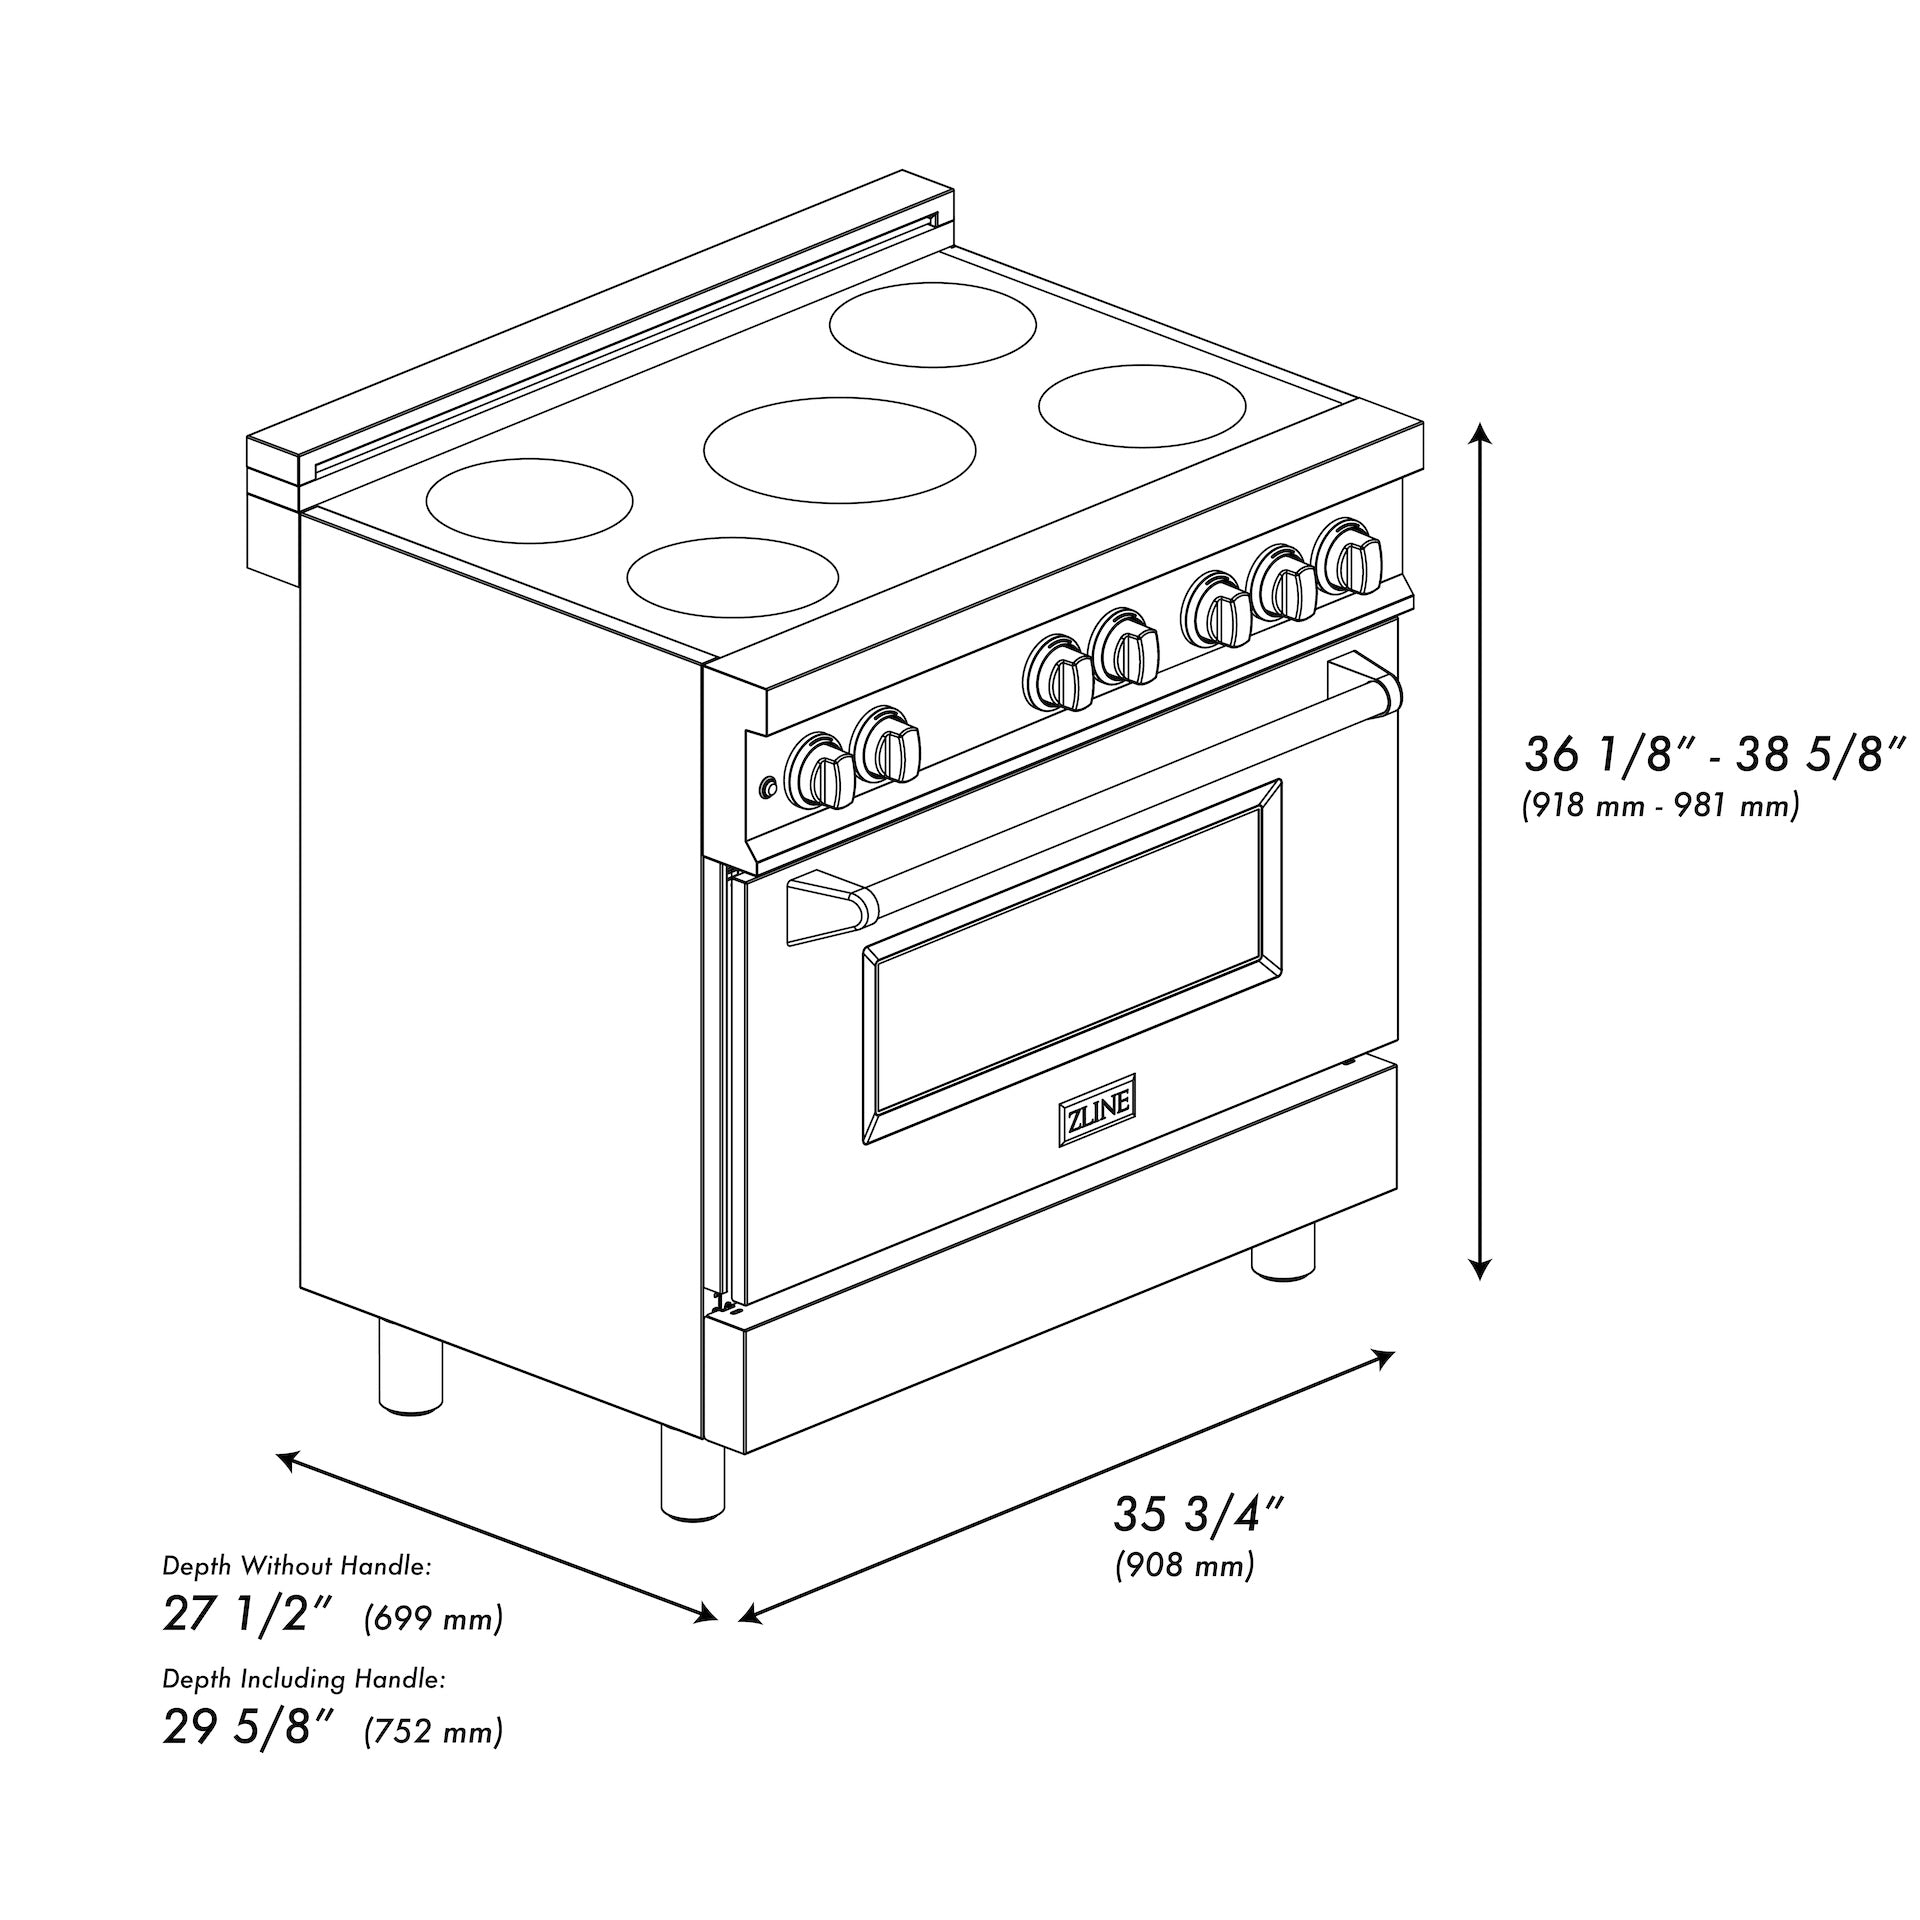 ZLINE 36 in. 4.6 cu. ft. Induction Range with a 5 Element Stove and Electric Oven in White Matte (RAIND-WM-36) dimensional diagram with measurements.